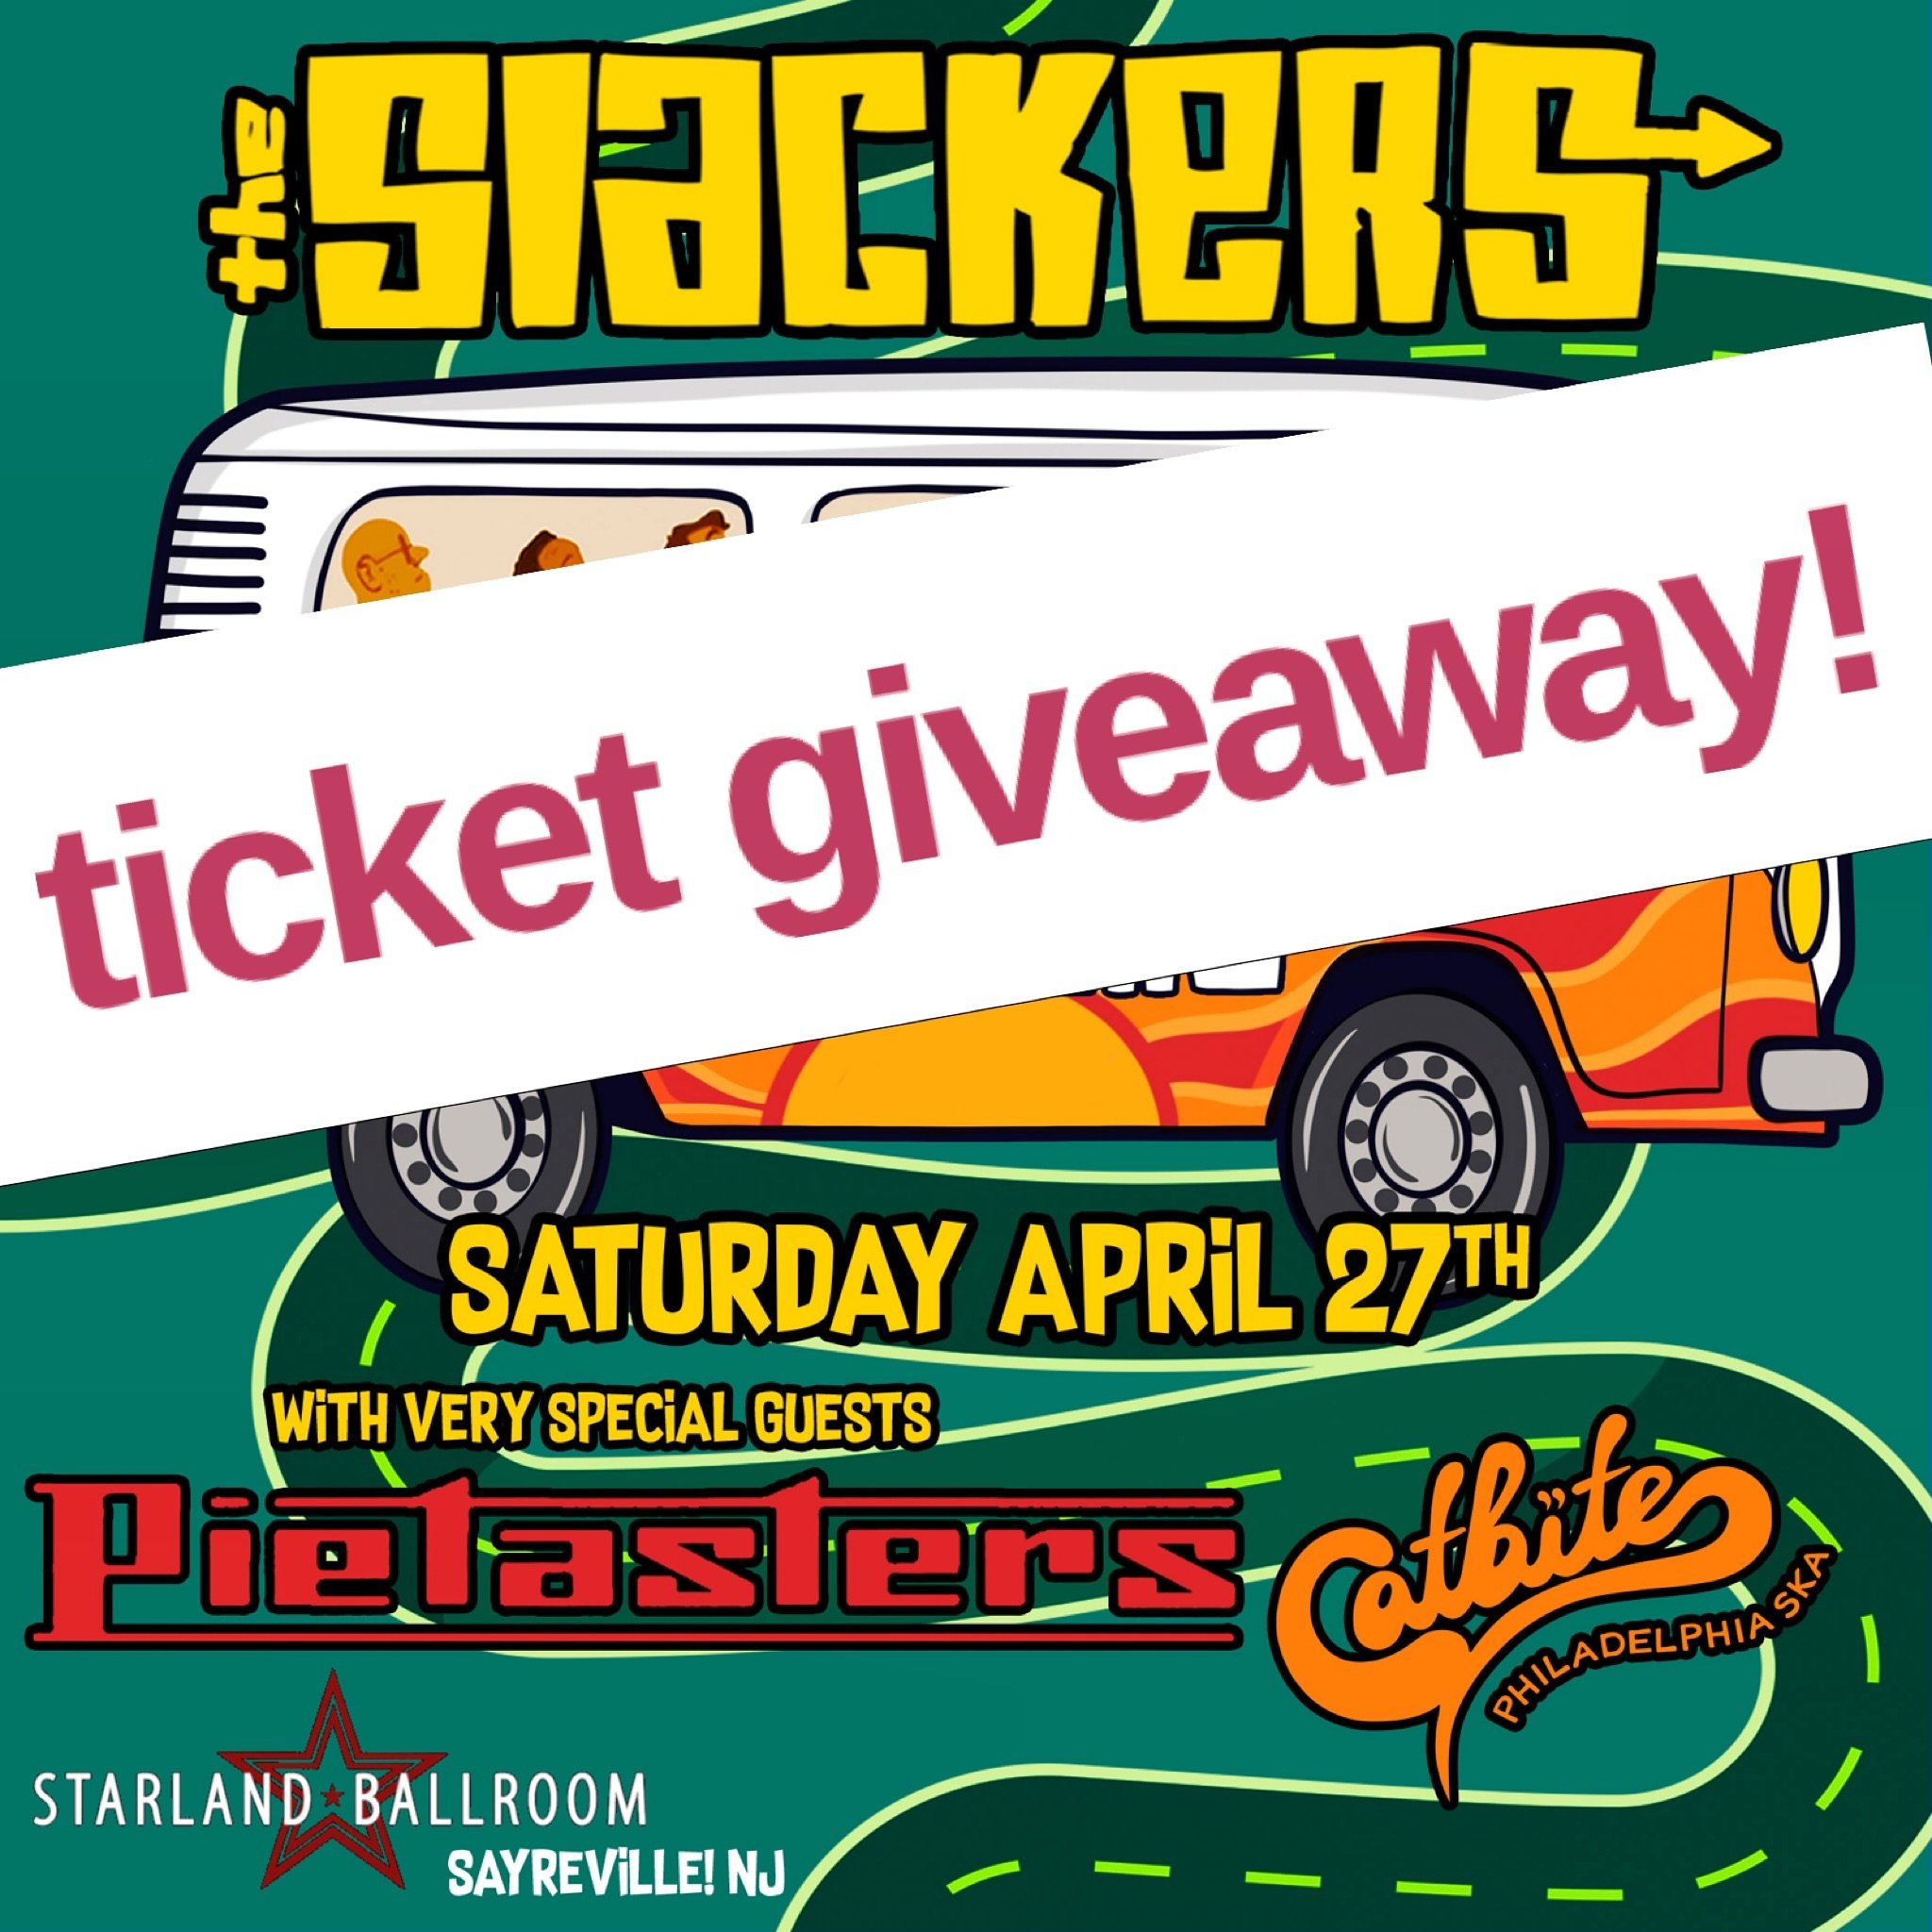 🕴️🕴️SKANK YOUR WAY TO FREE SLACKERS TICKETS TOMORROW NIGHT AT STARLAND BALLROOM!🕴️🕴️

Starland and Ska! Two great things that go great together! We&rsquo;re amped to be giving away two pairs of tickets to tomorrows night @theslackersband gig at @